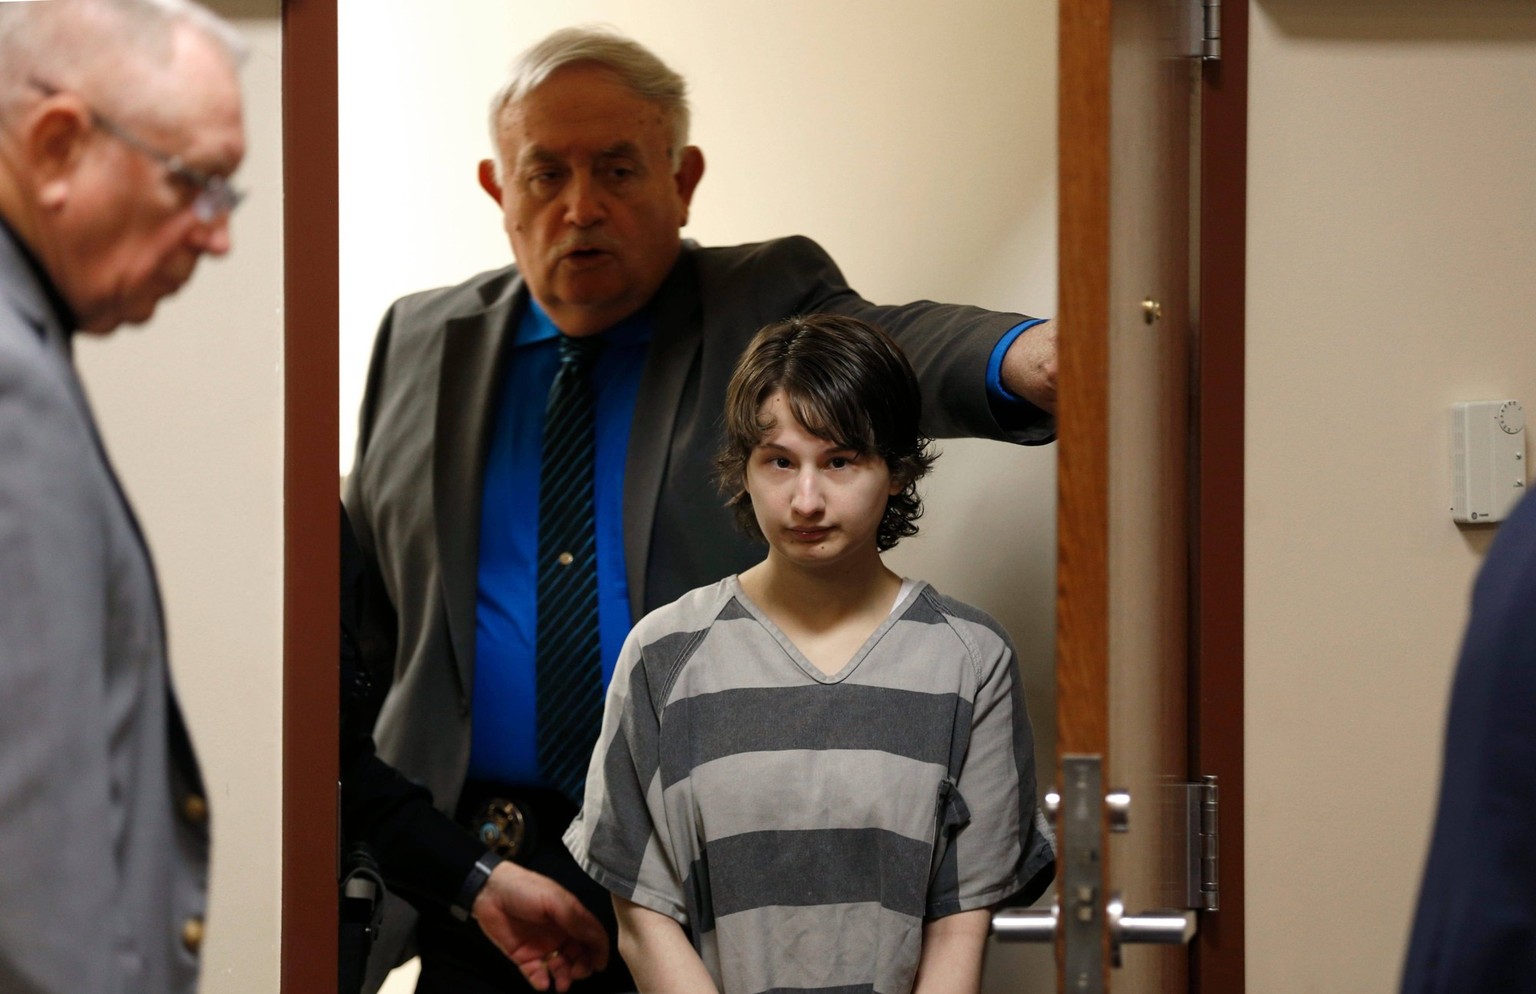 News: Gypsy Blanchard Jan 11, 2015 Springfield, MO, USA Gypsy Blanchard enters the courtroom on Monday, Jan. 11, 2015, for a pre-trial conference where a trial date was set for the couple accused of k ...